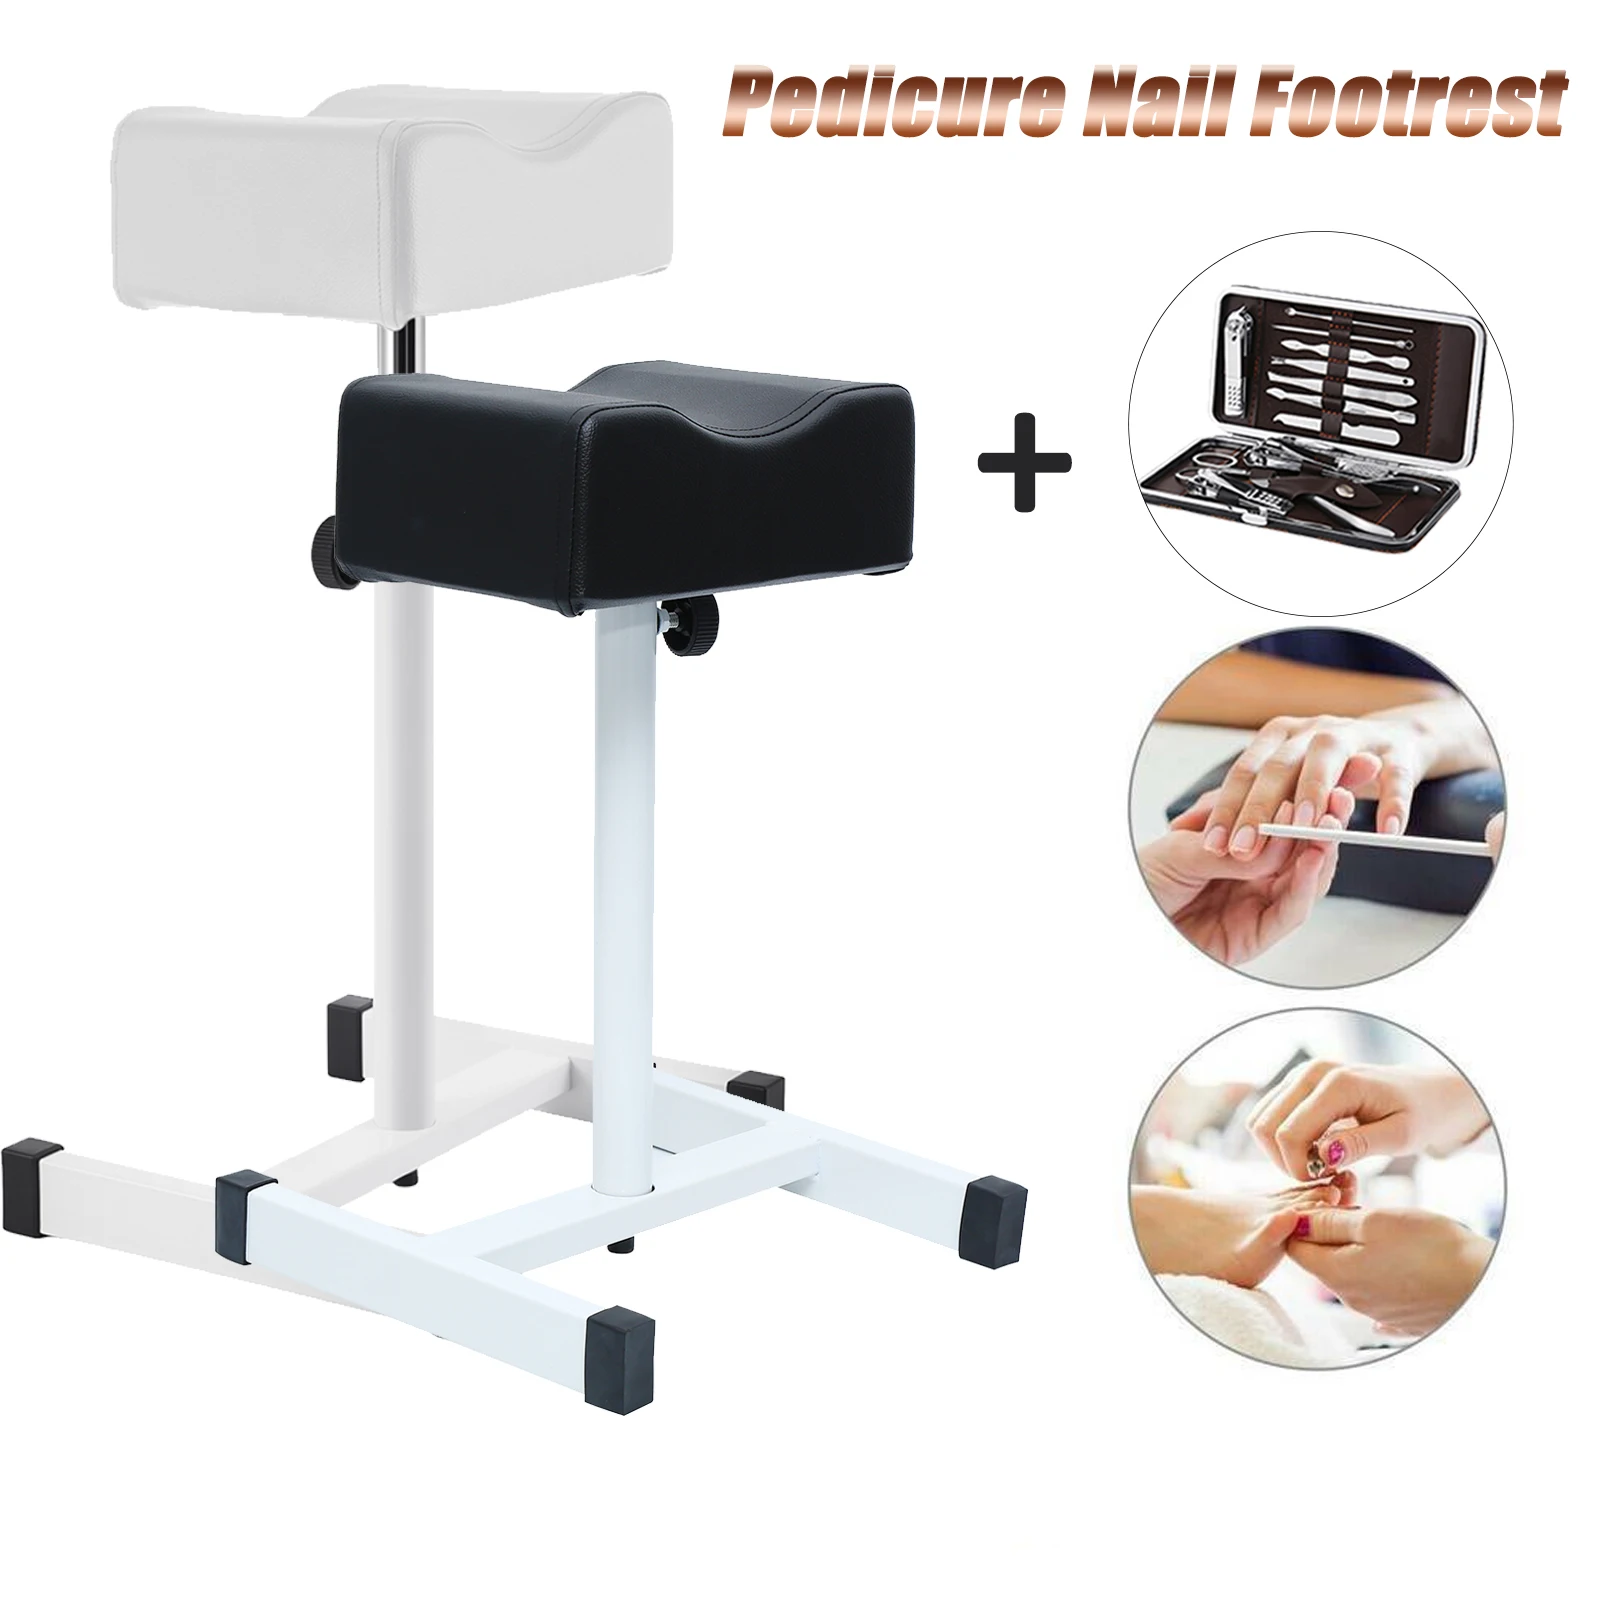 Pedicure Nail Footrest Manicure Foot Rest Desk Salon Spa Stand Stool Adjustable with 12pcs Dead Sskin Remover Tools White Black